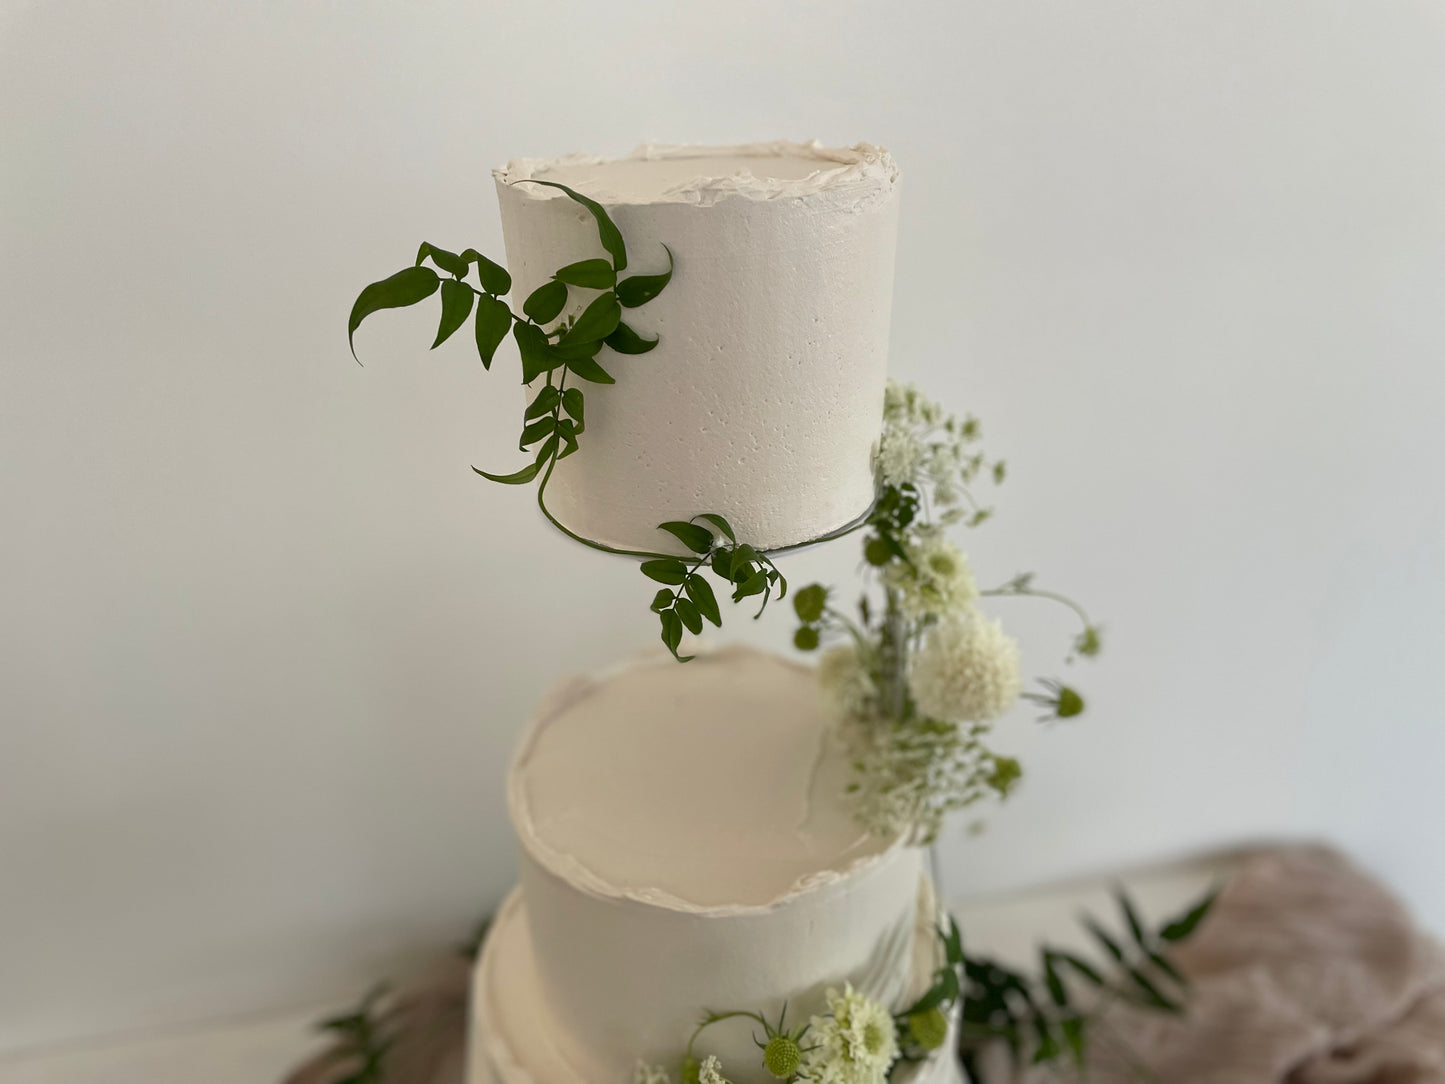 3 Tier Floating Ivory Buttercream with Spring Flowers